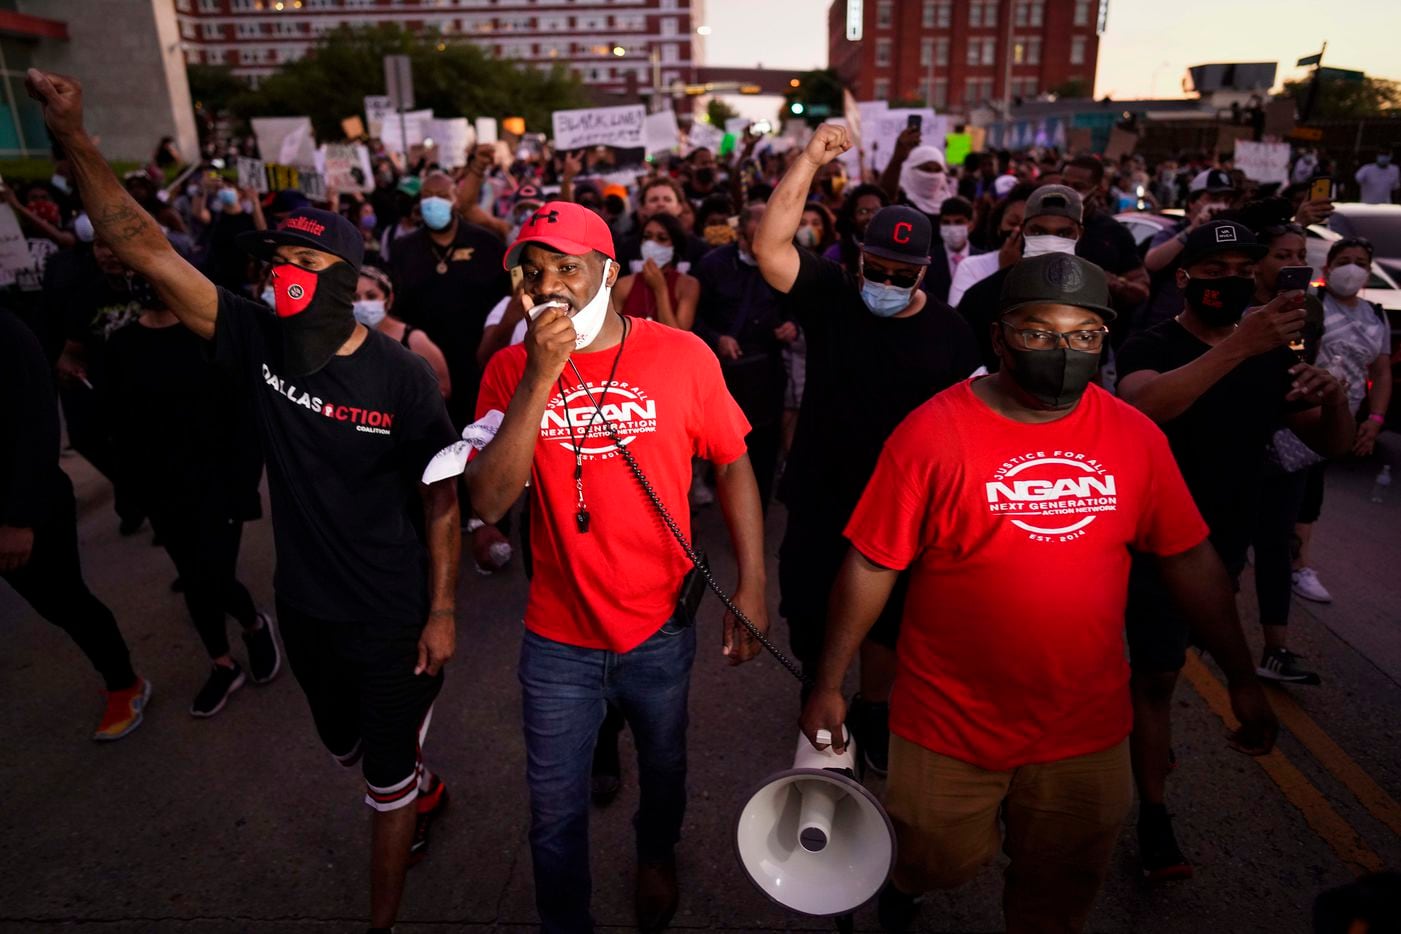 Dominique Alexander, the head of Next Generation Action Network, leads a march against...